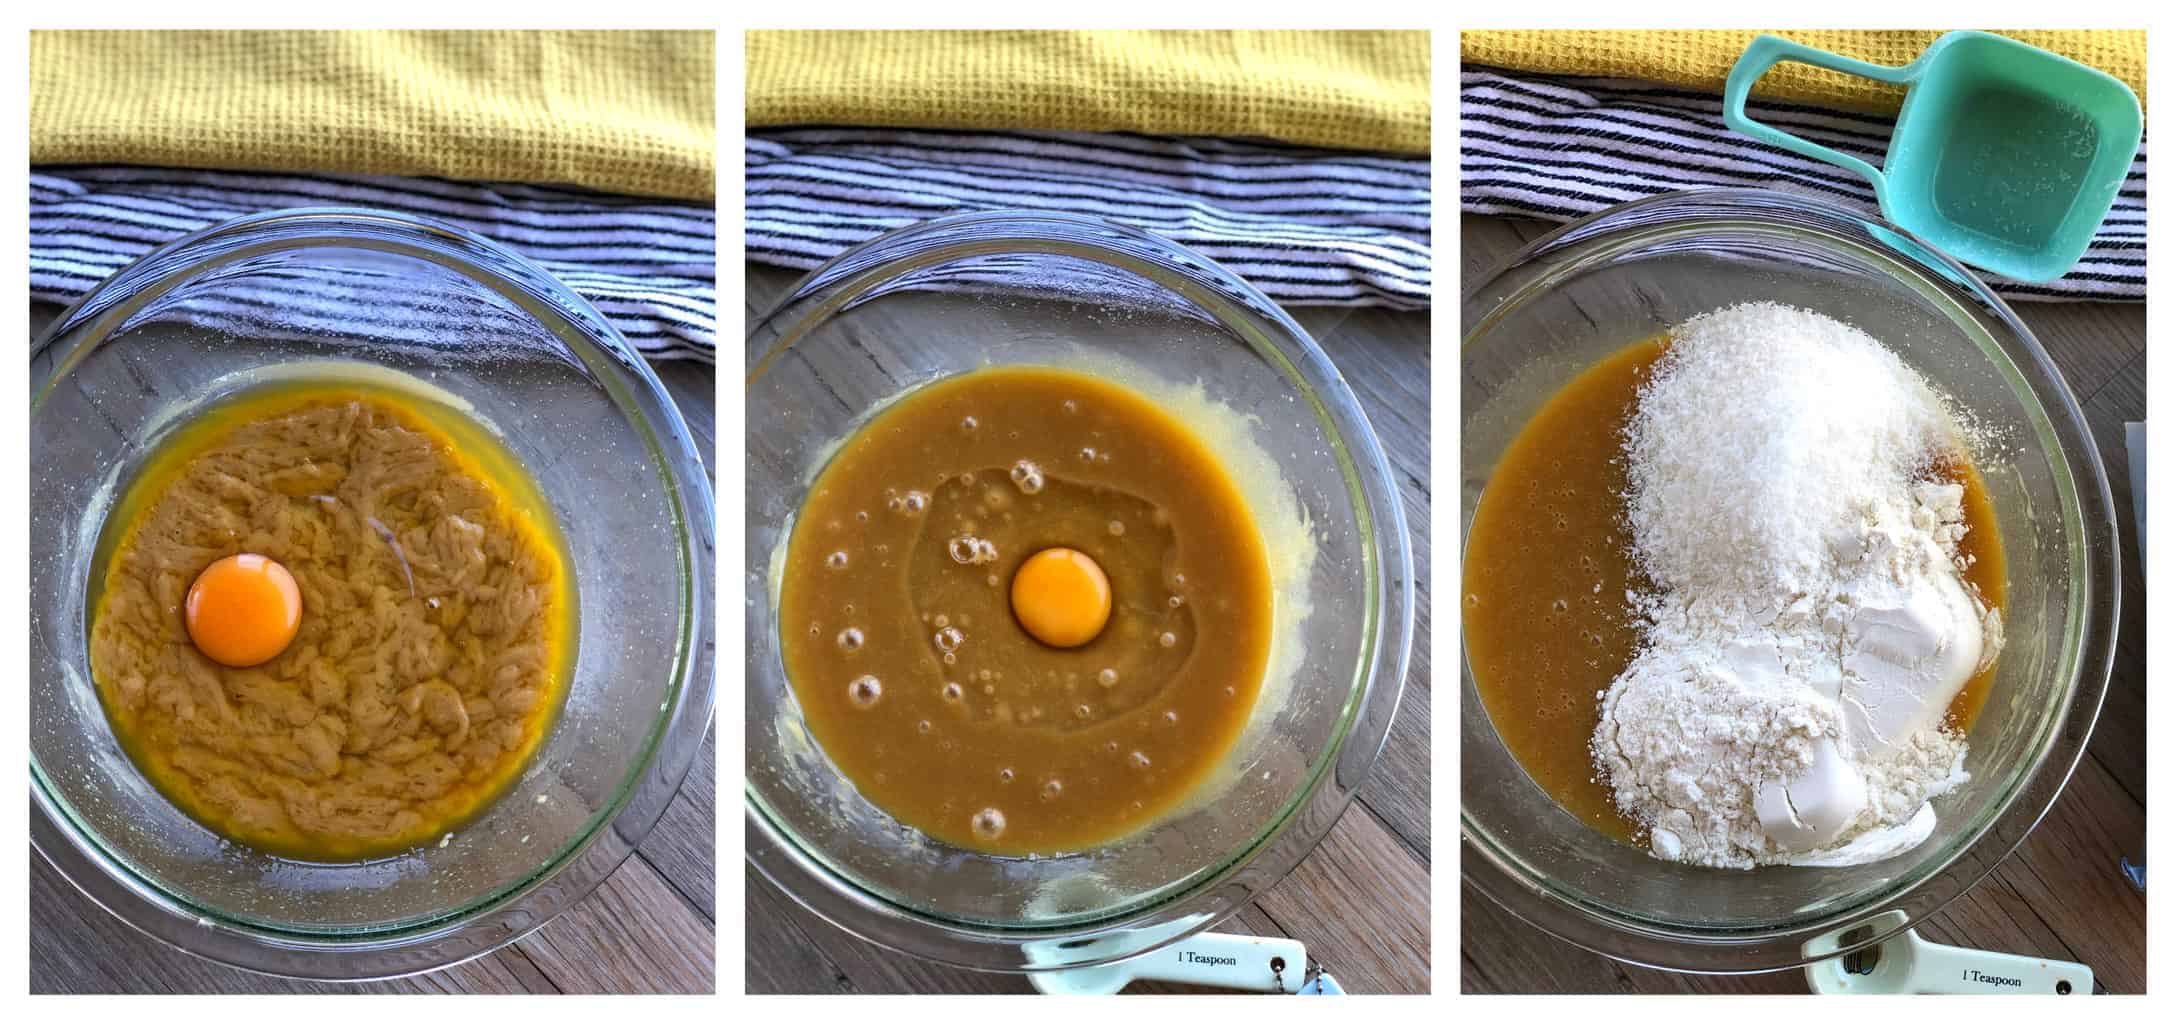 Process for adding ingredients 